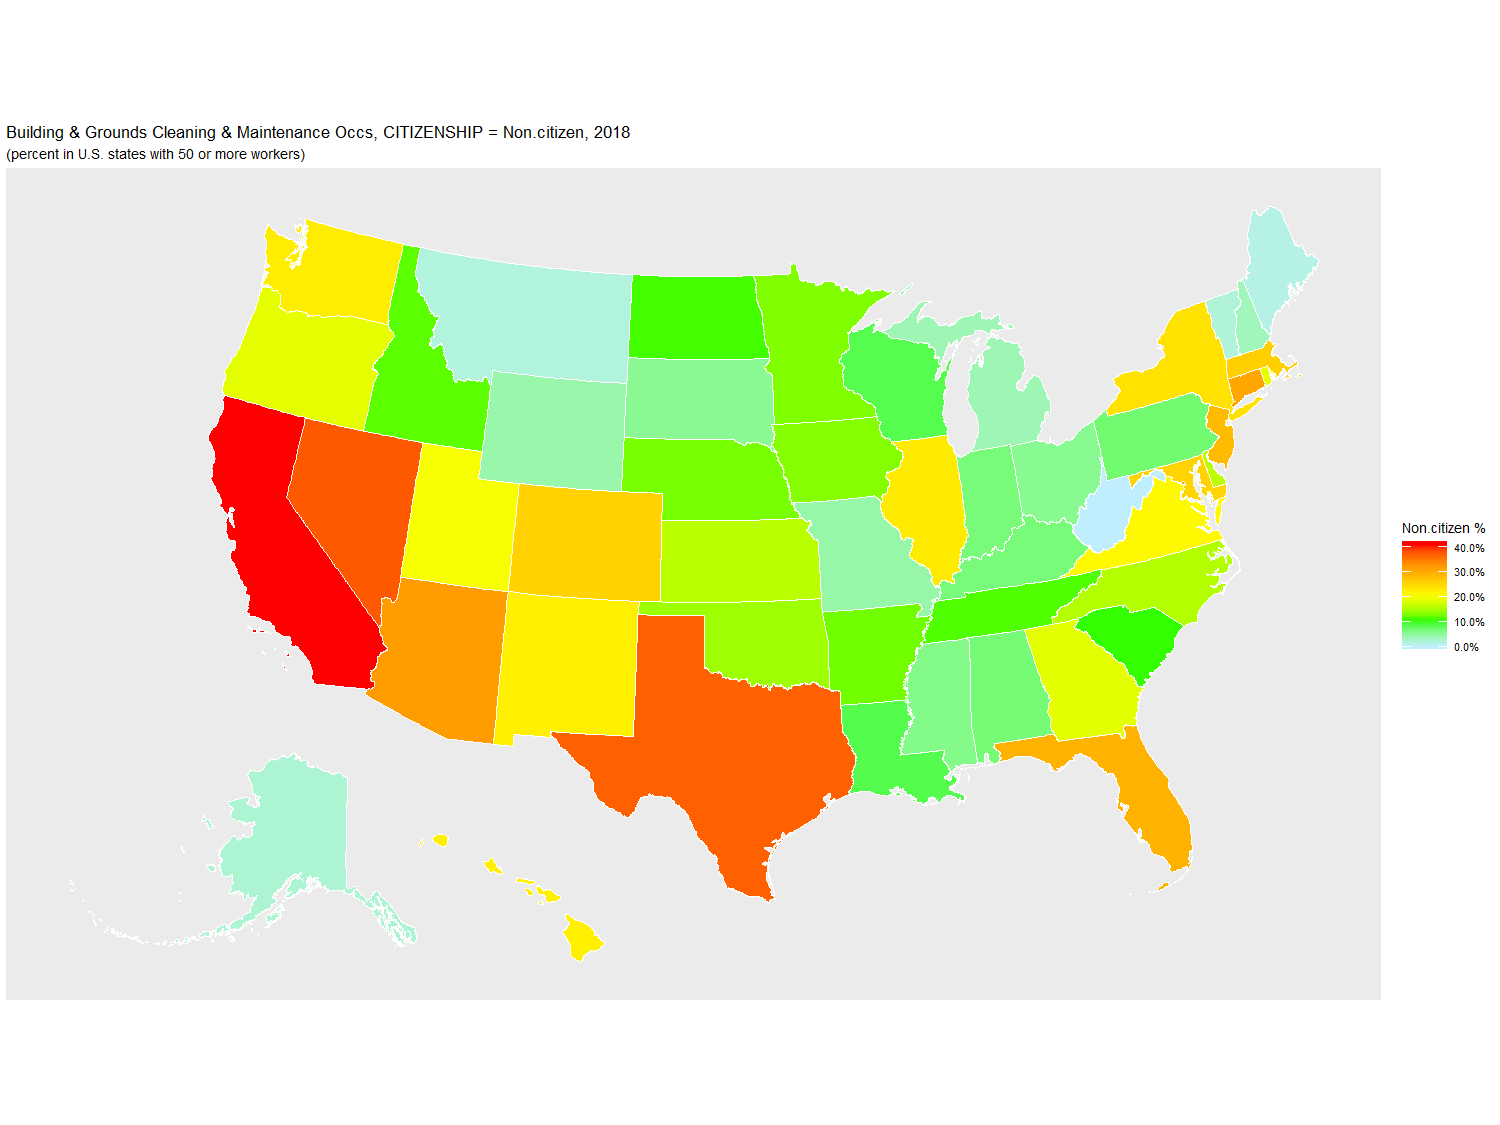 Non-citizen Percentage of Building & Grounds Cleaning & Maintenance Occs by U.S. State, 2018